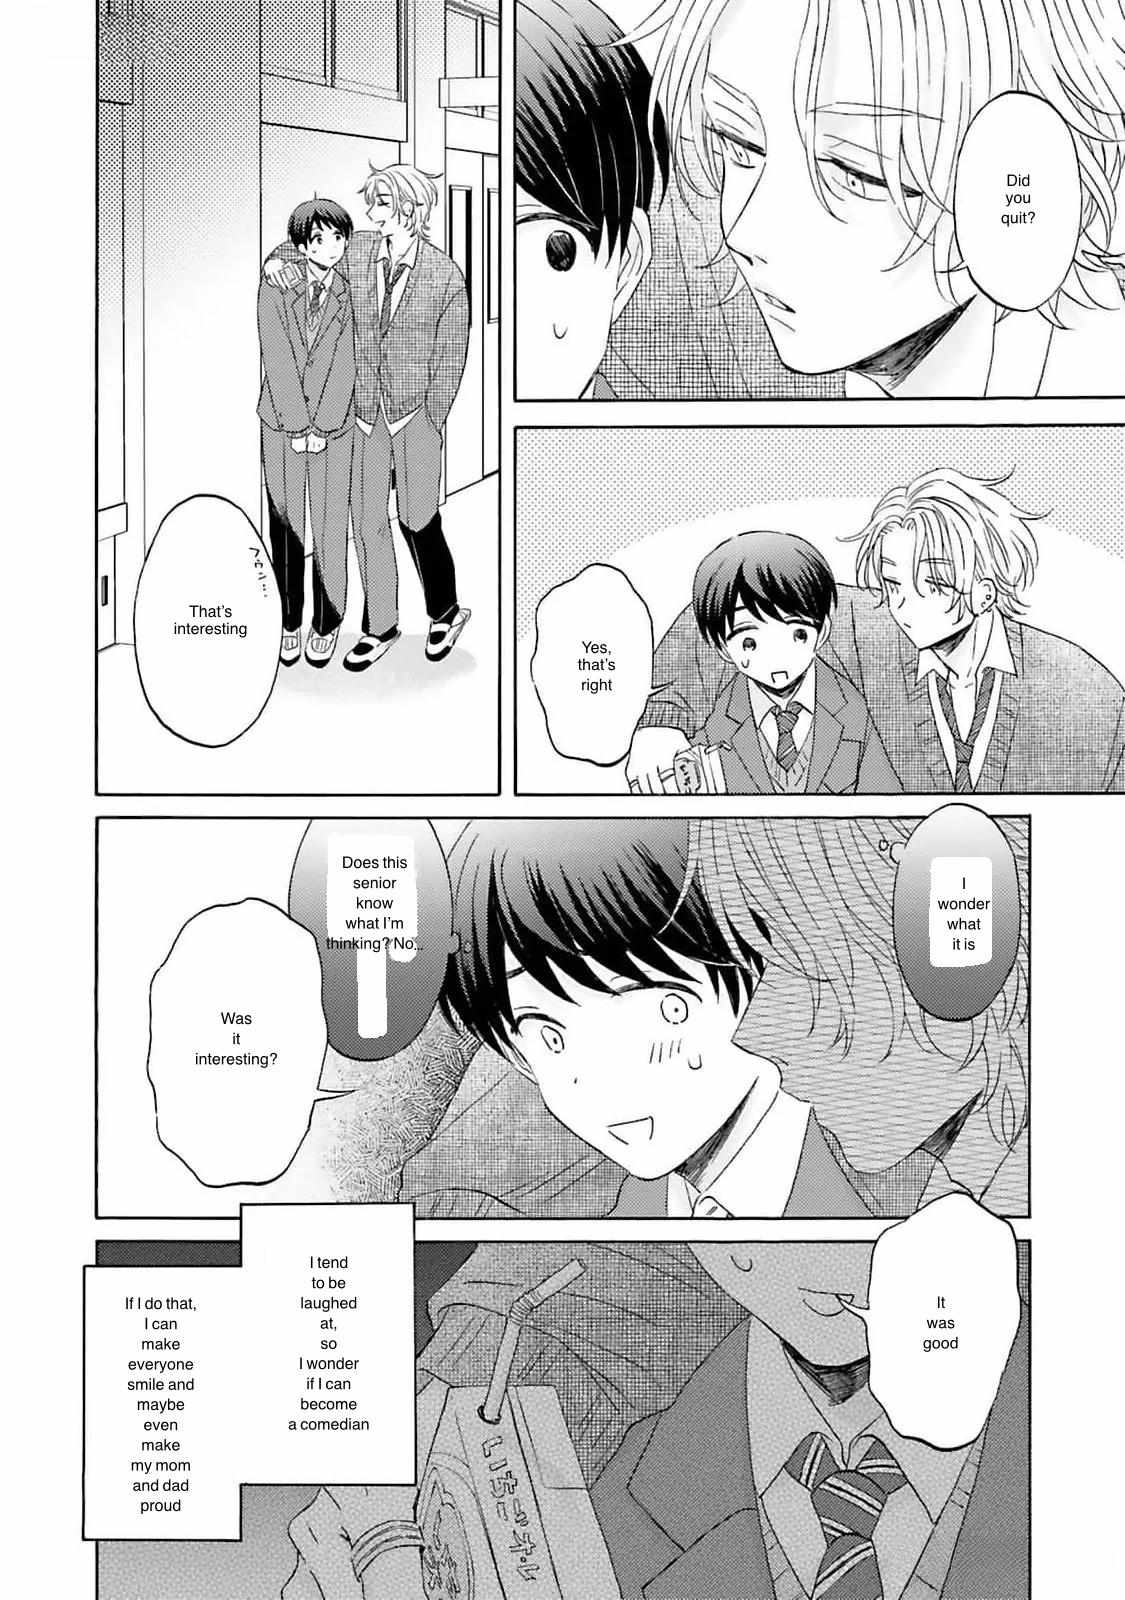 My Cutie Pie -An Ordinary Boy And His Gorgeous Childhood Friend- 〘Official〙 - 4 page 24-5b9bd3db